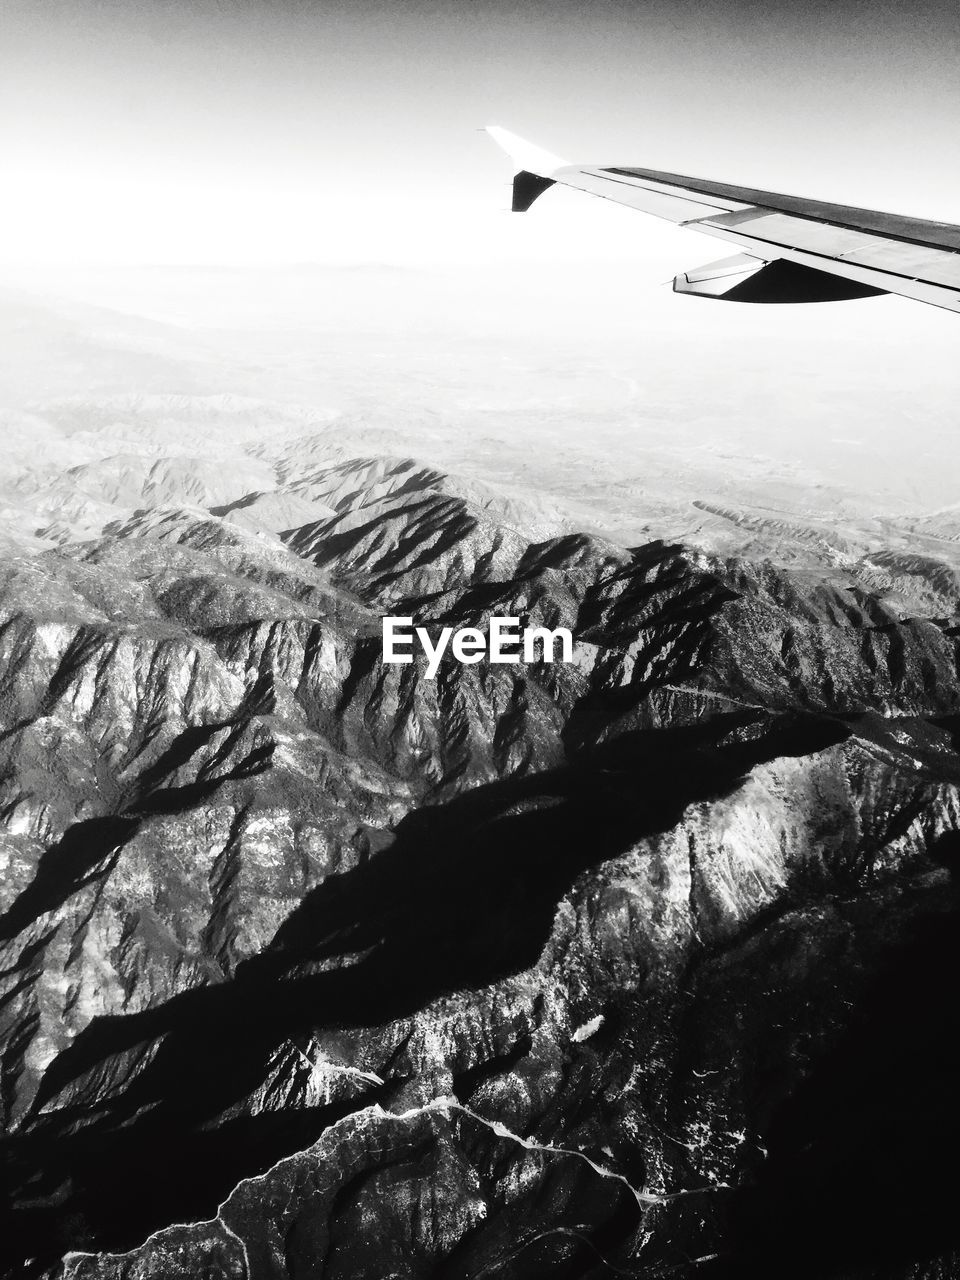 Cropped image of airplane flying over rocky mountains